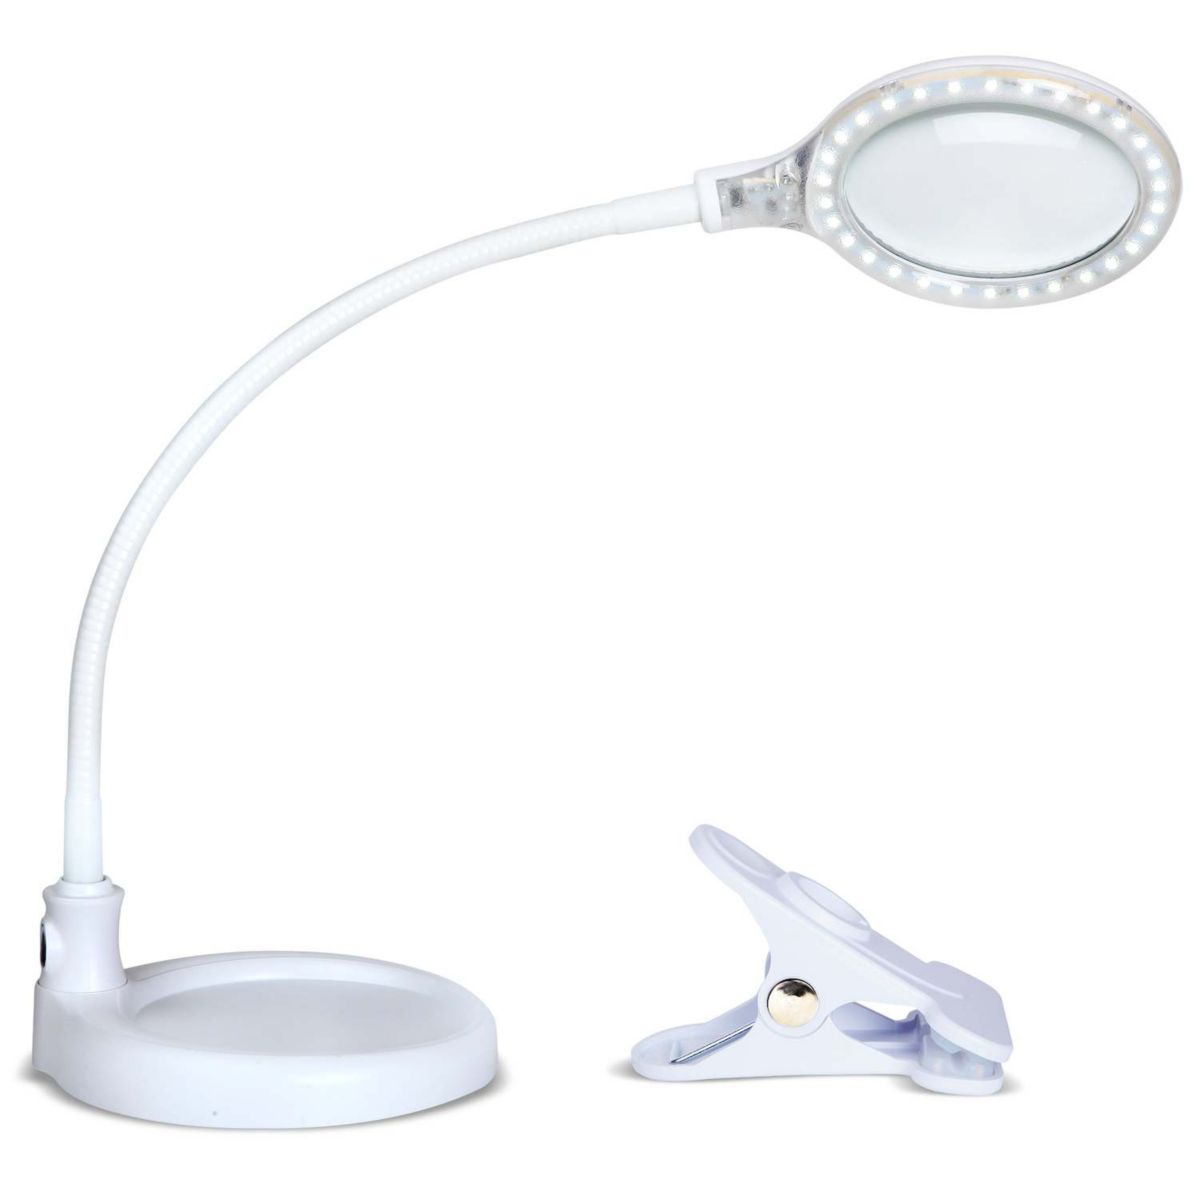 Brightech Lightview Flex 2.25x Magnifying, 3 Diopter Led Task Lamp W/ 2 Base Options, White Brightech